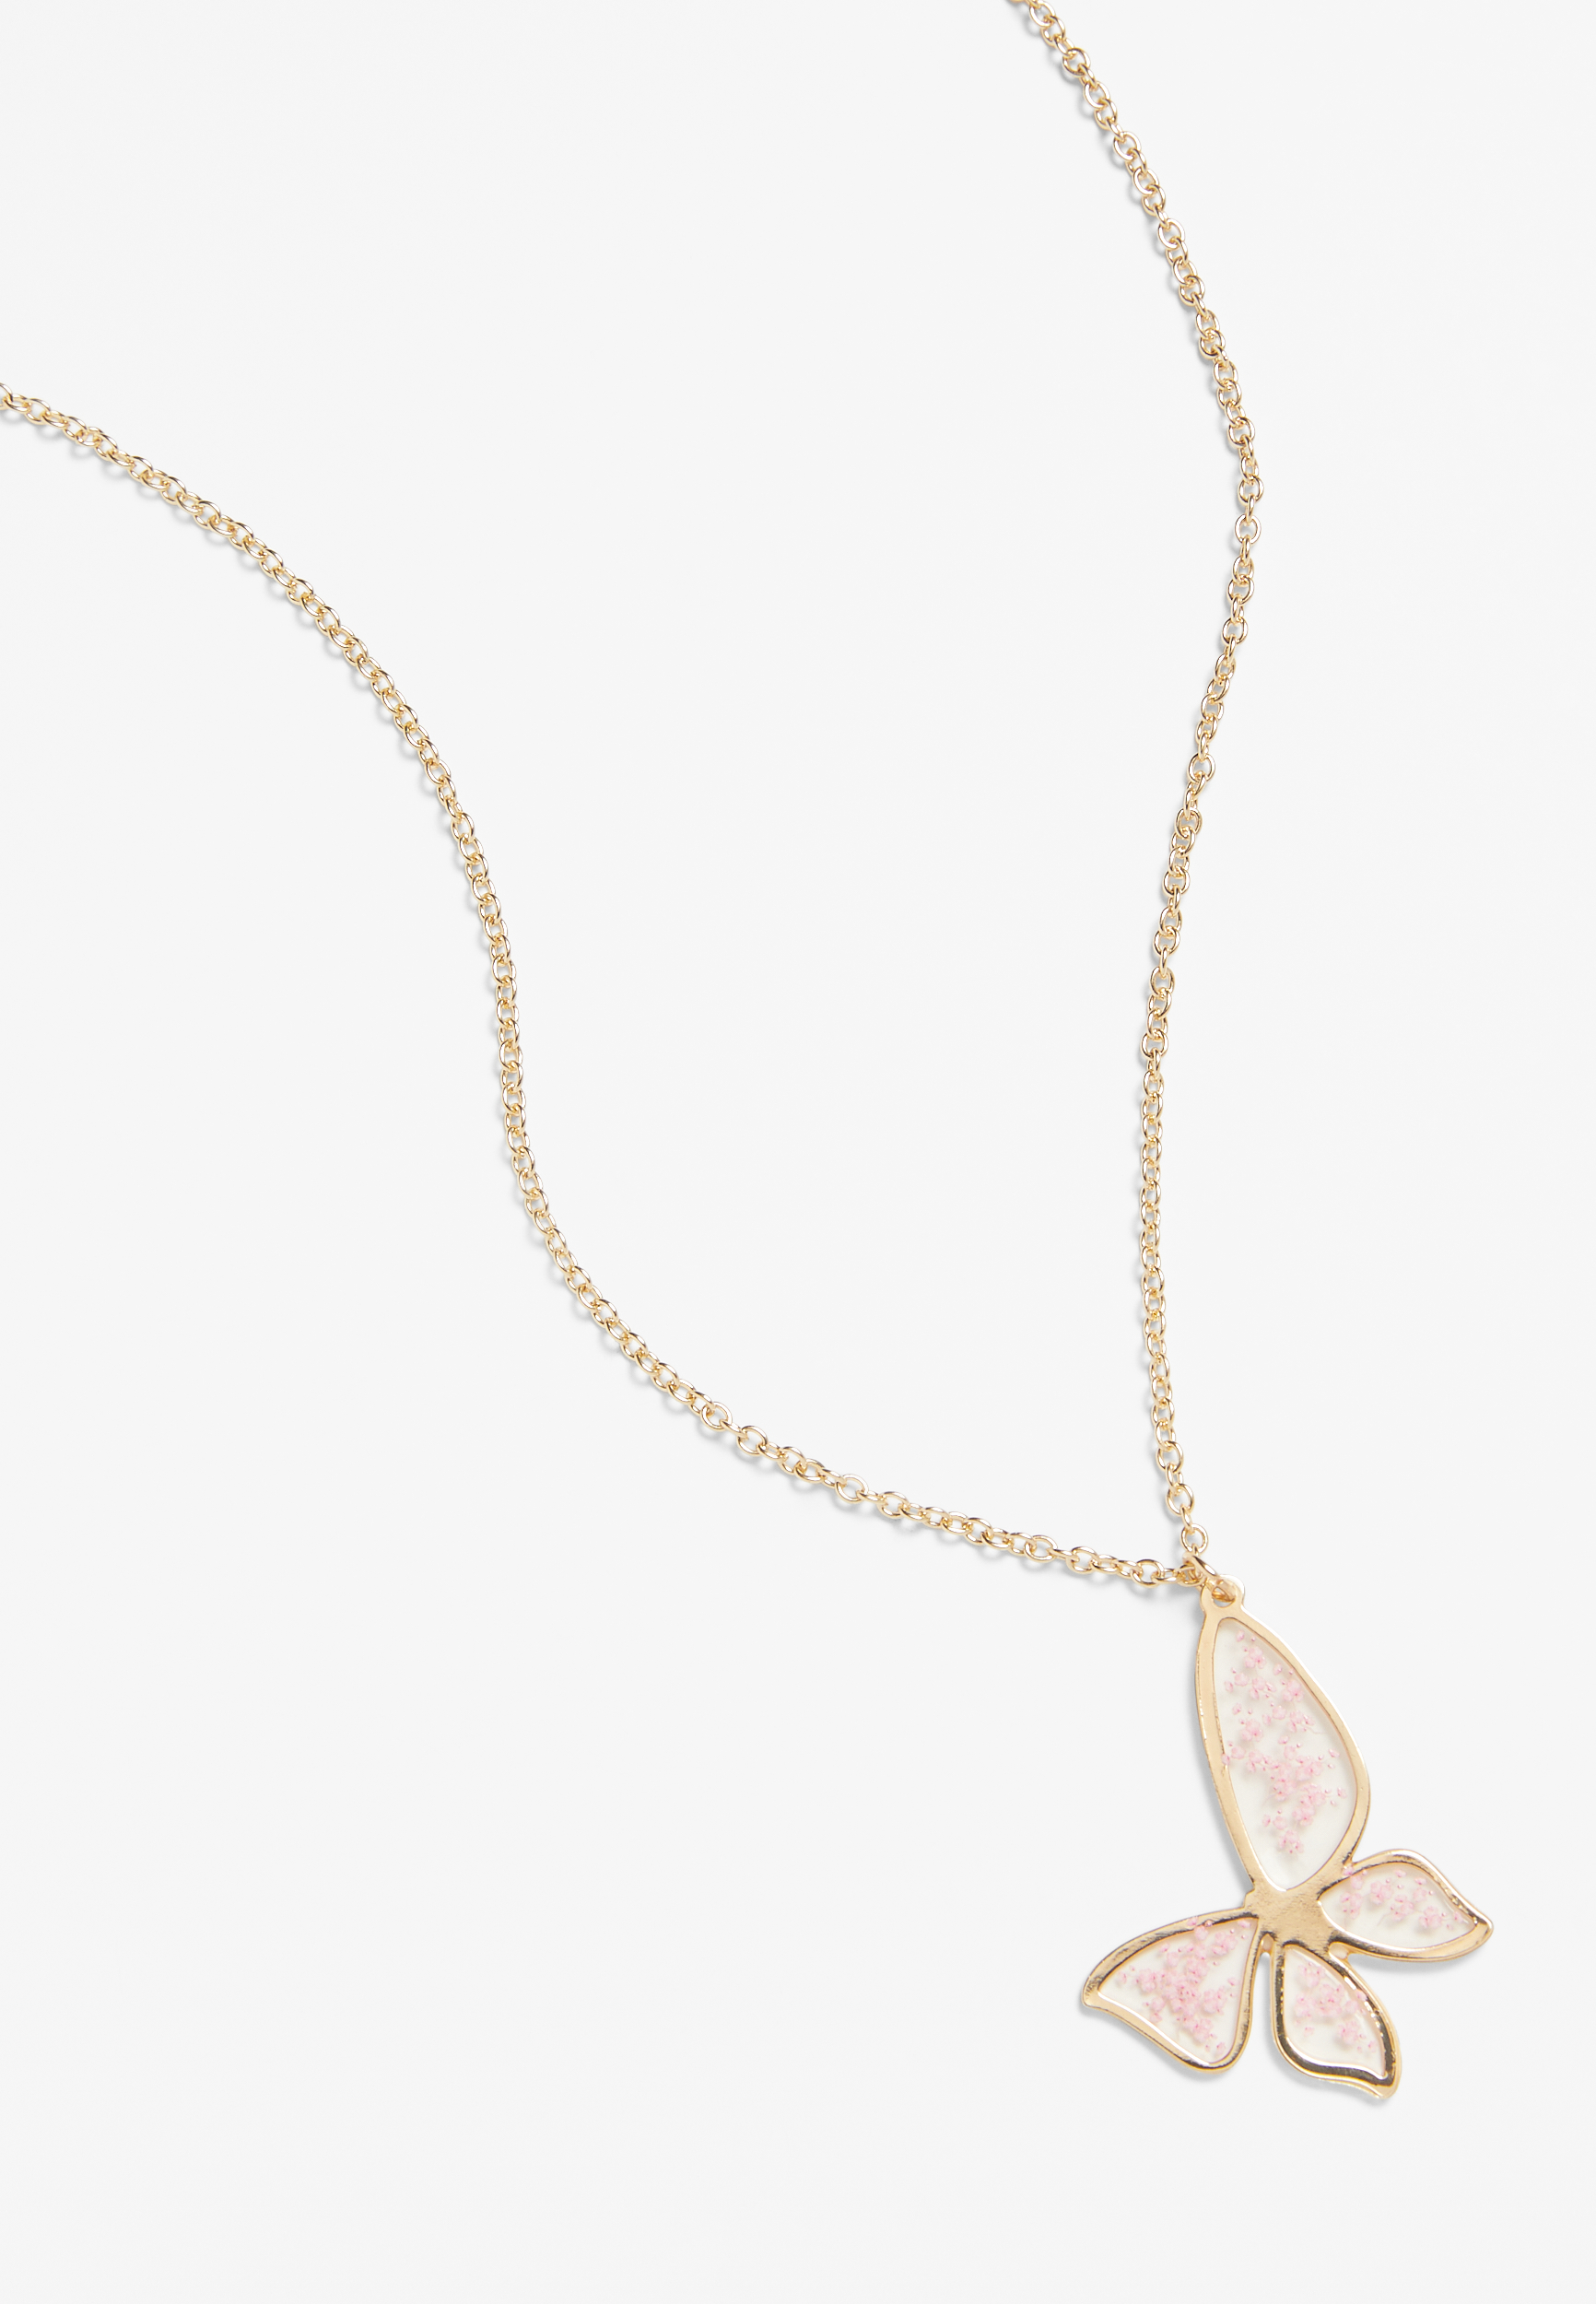 Girls Butterfly Necklace | maurices